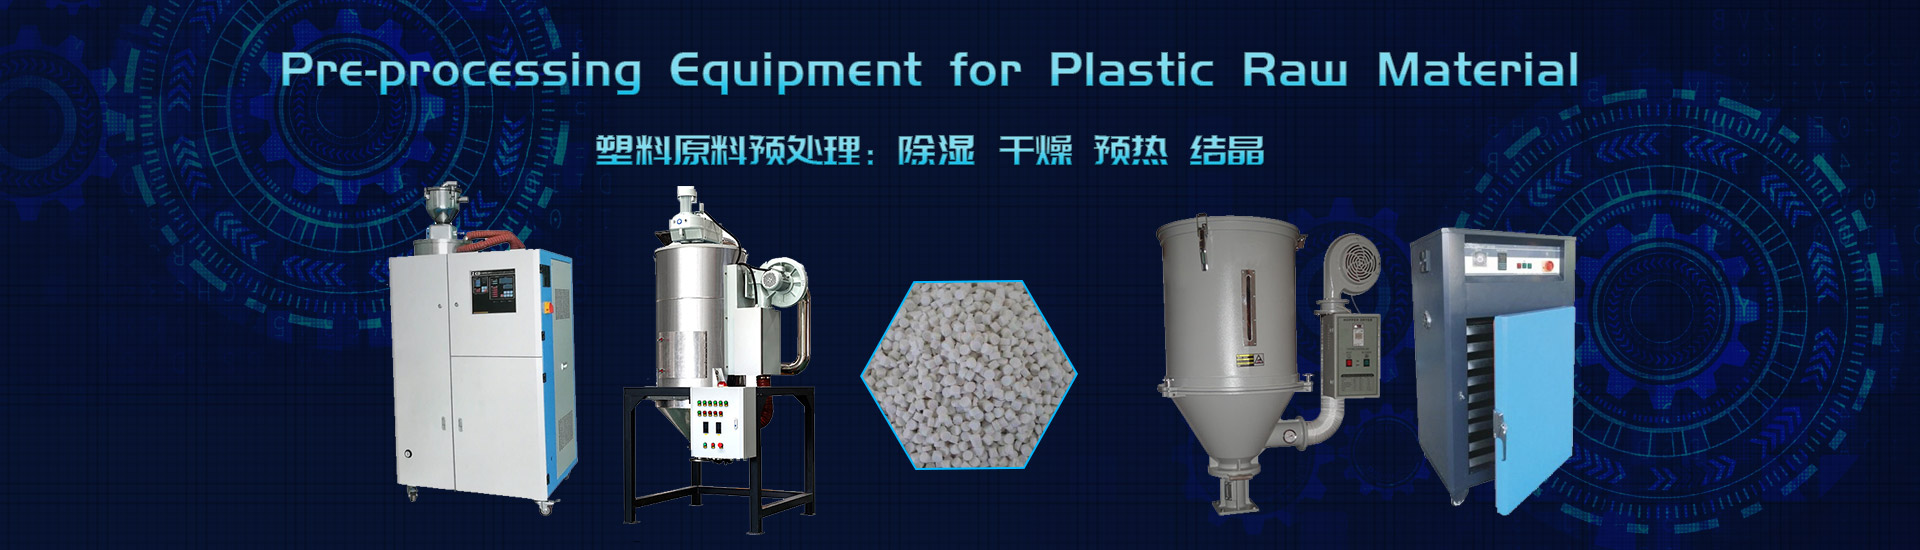 Pre-processing Equipment for Plastic Raw Material